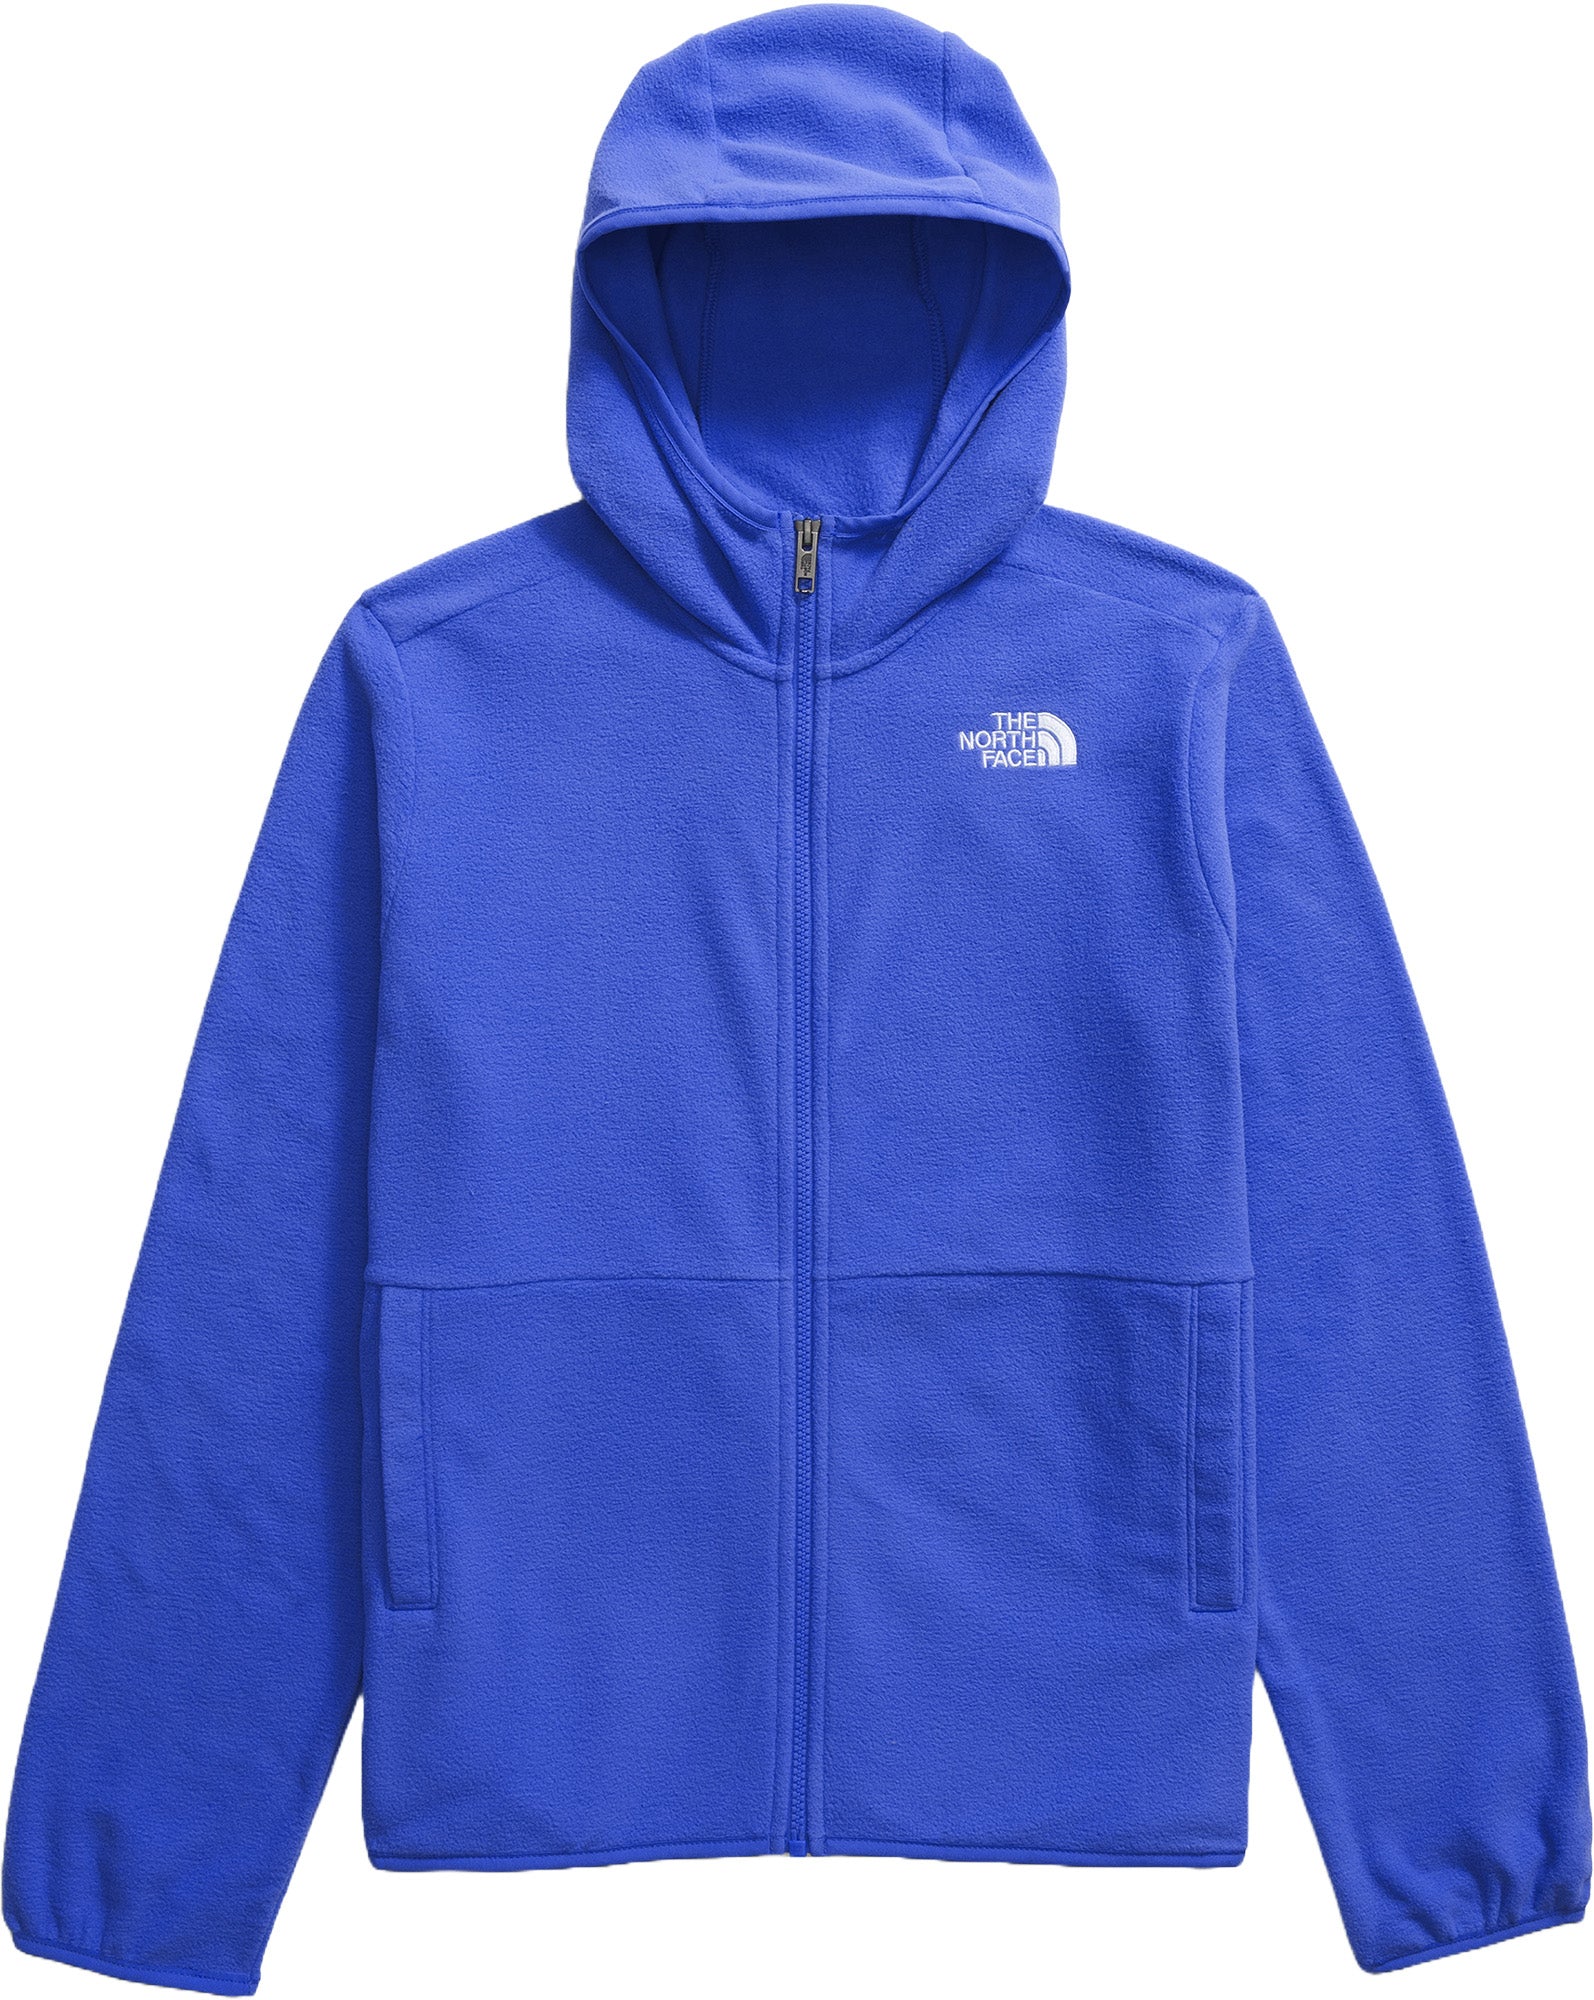 The North Face Glacier Full Zip Hooded Jacket - Youth